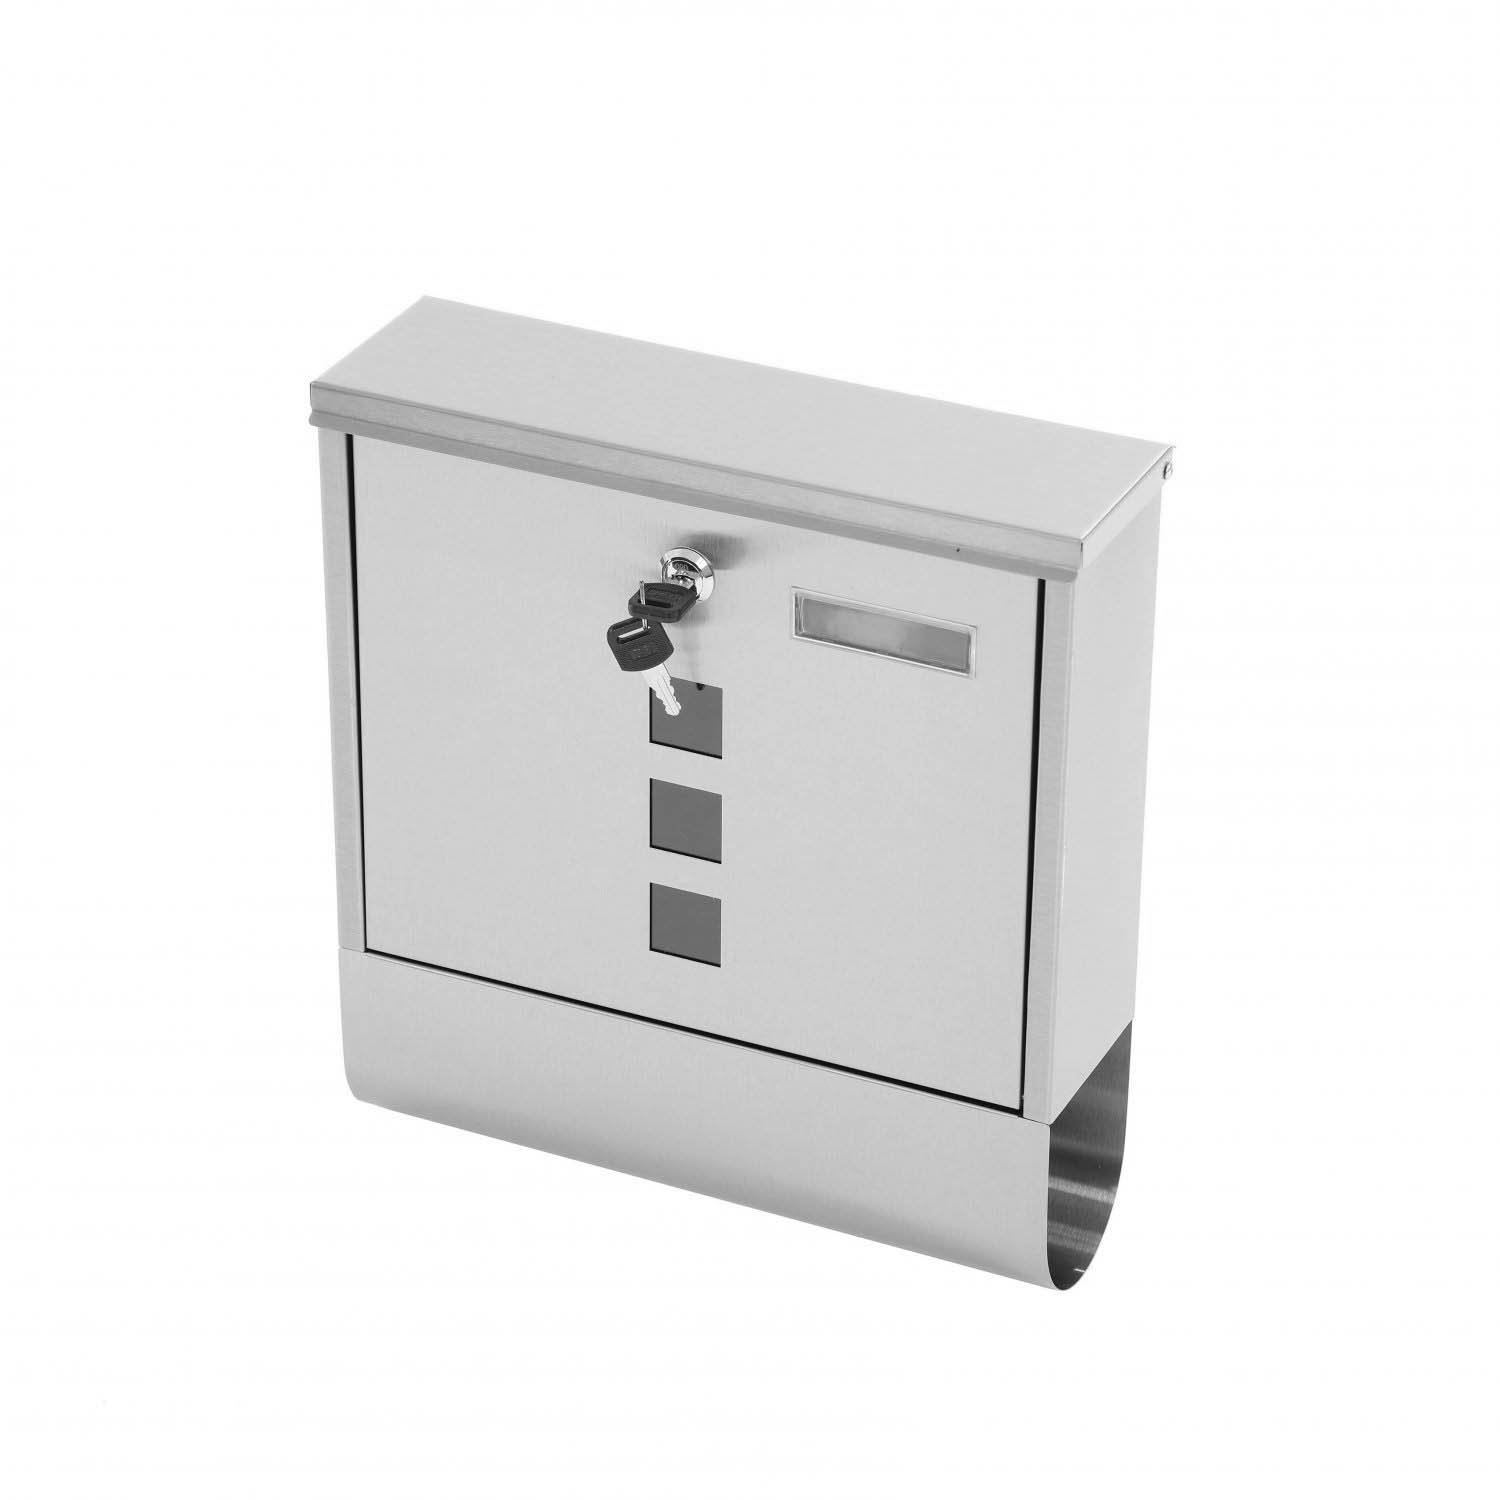 Wall Mounted Stainless Steel Mail Letter Post Box with Newspaper Holder